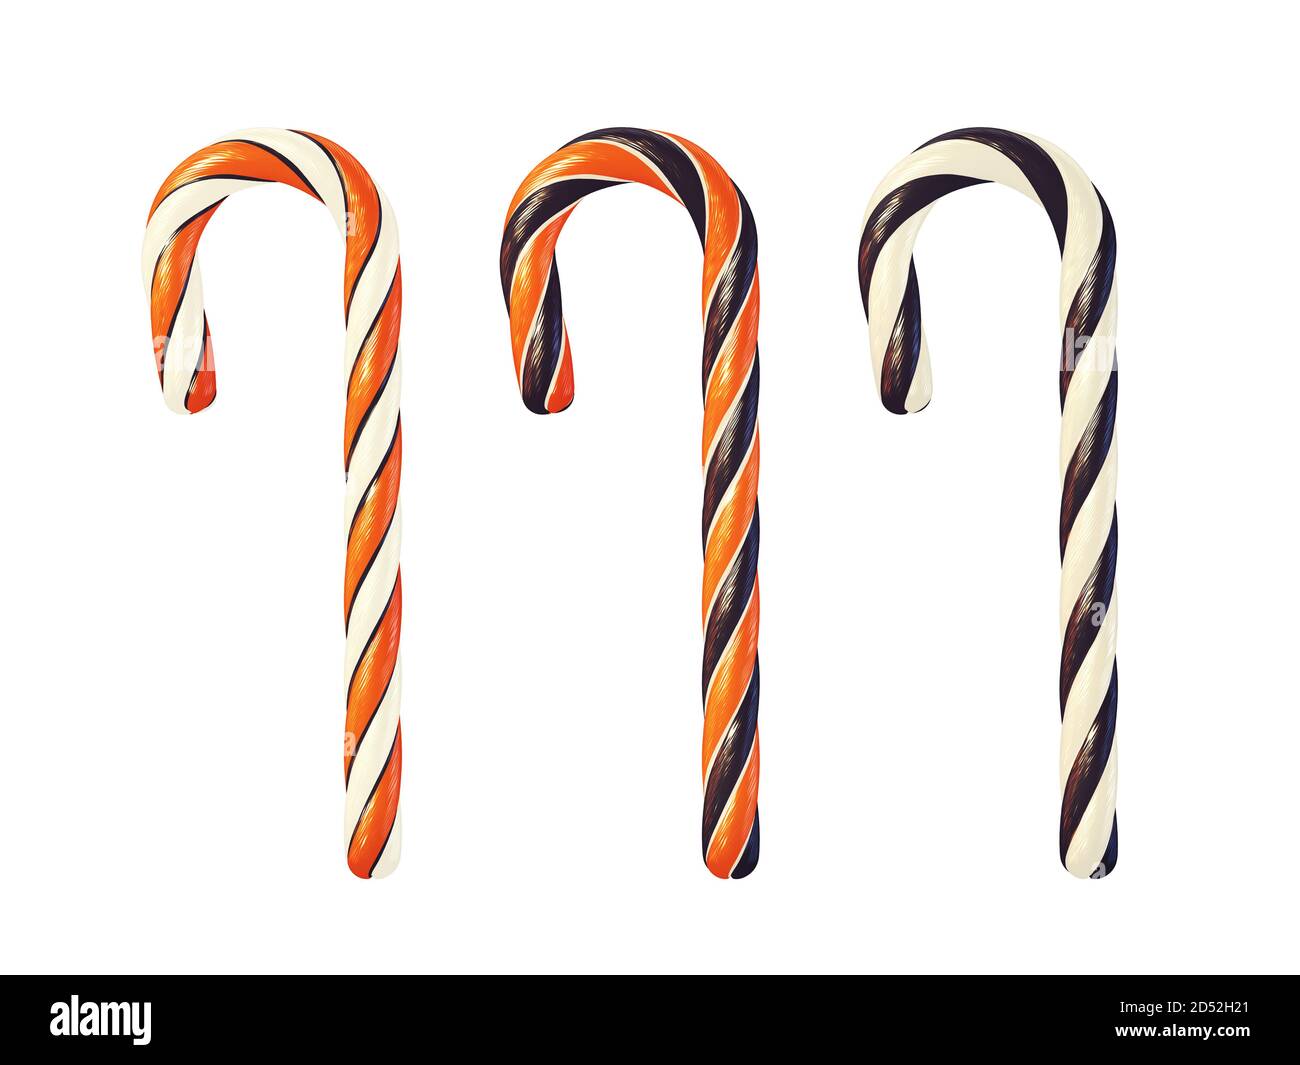 Halloween candy canes isolated on white Stock Photo